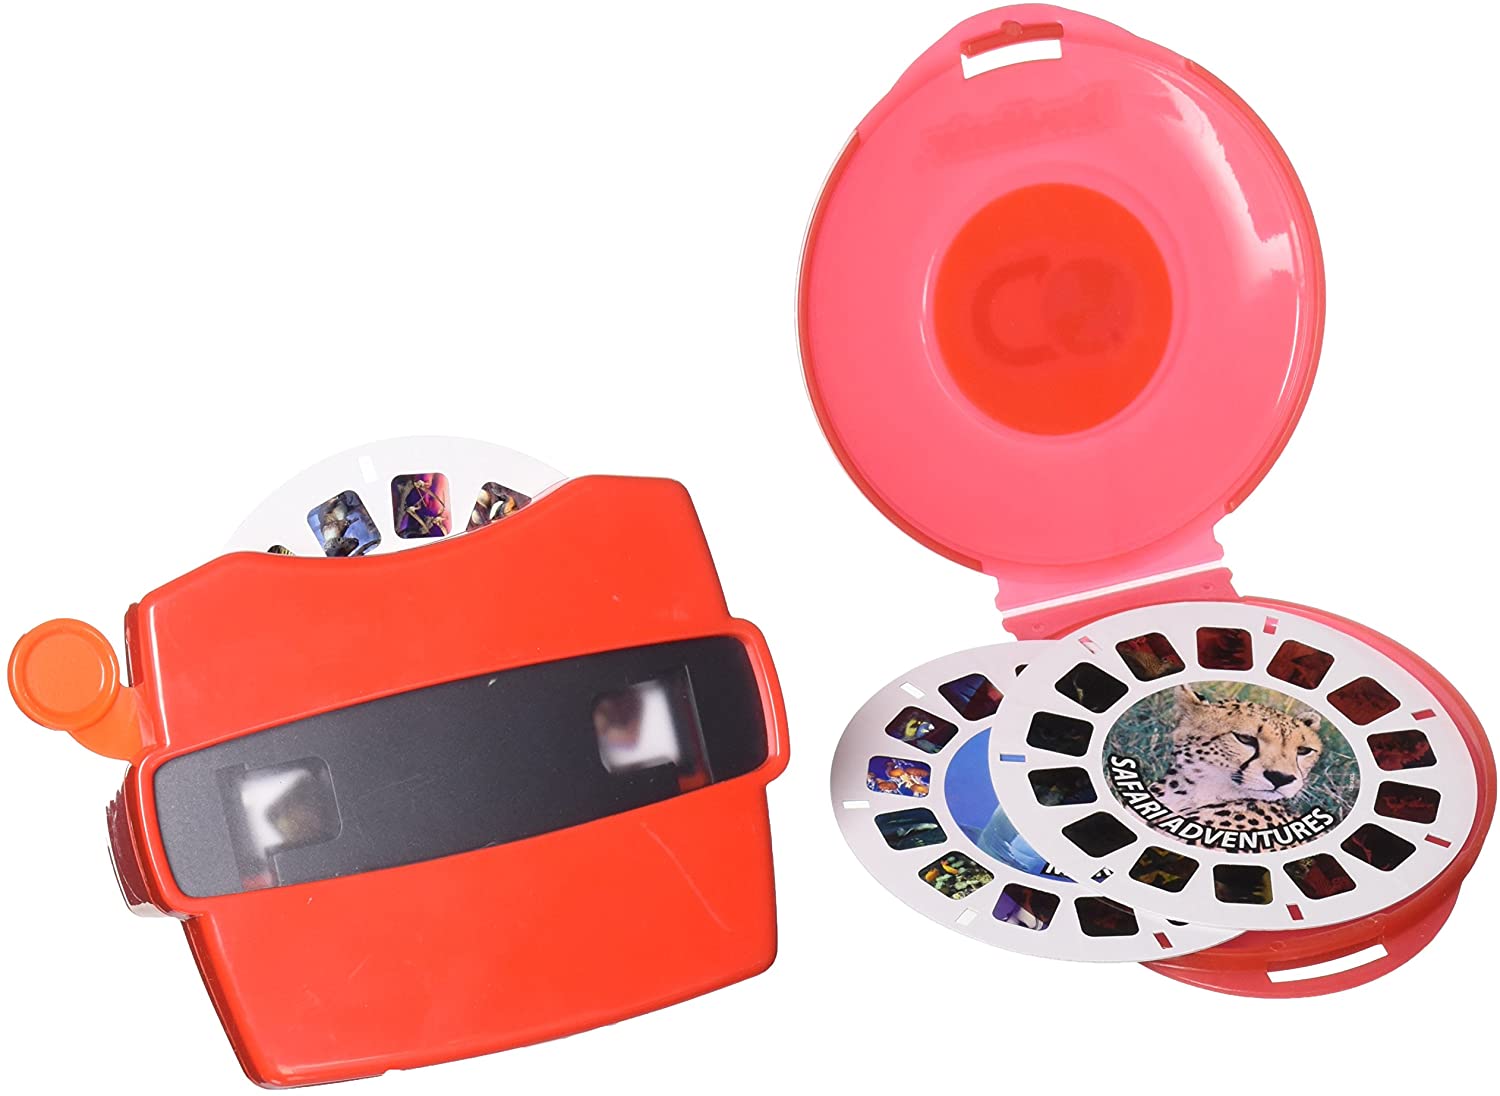 View Master